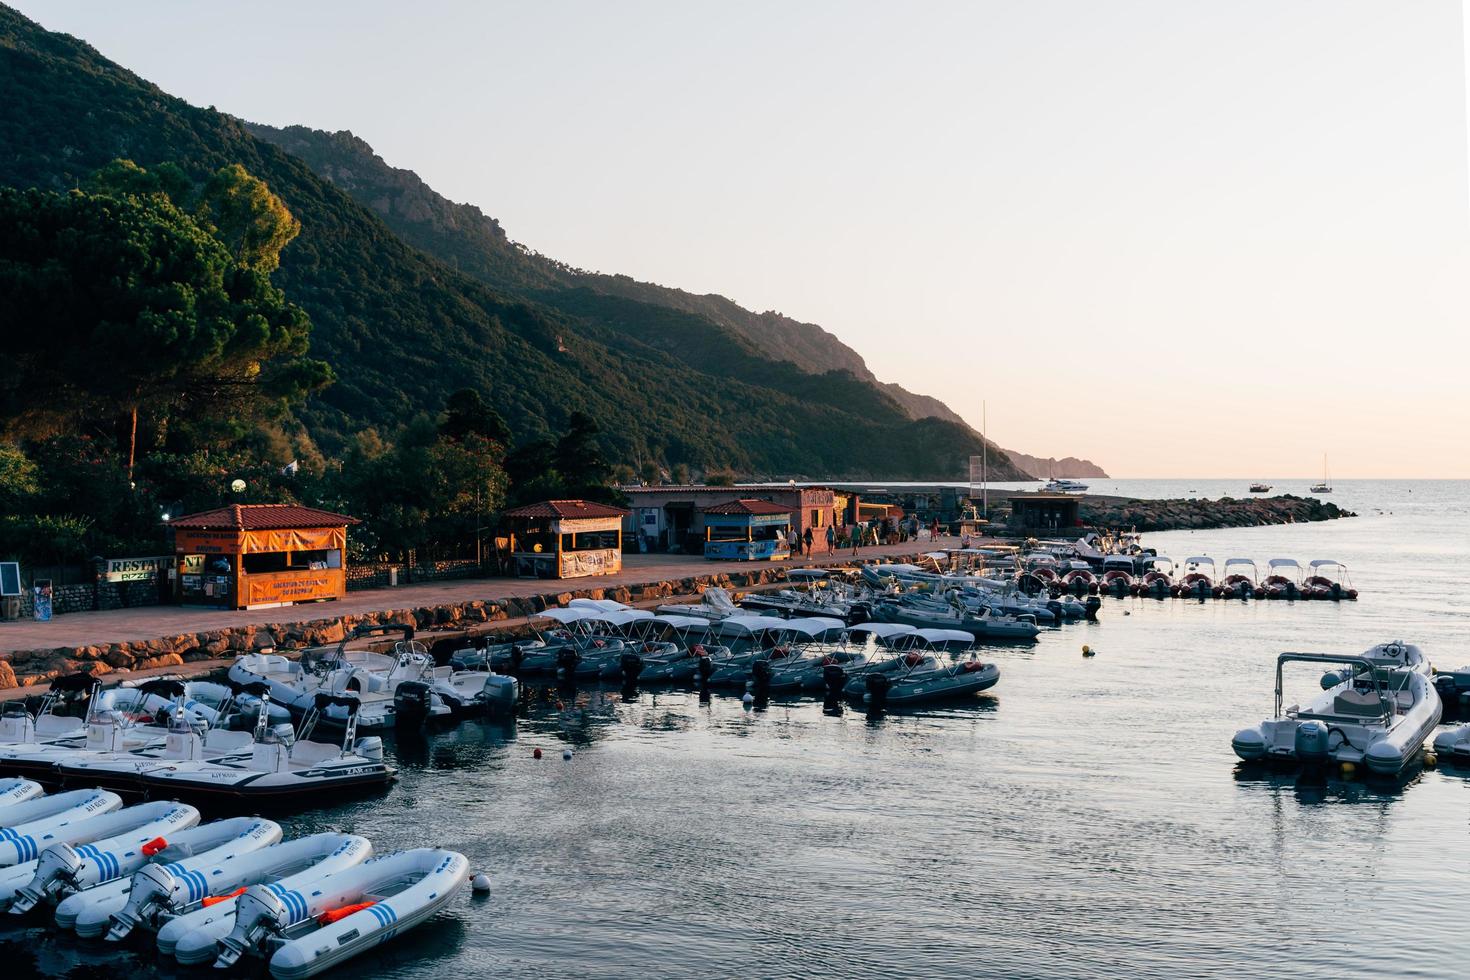 Corsica, France, 2020 - Small harbor at sunset photo